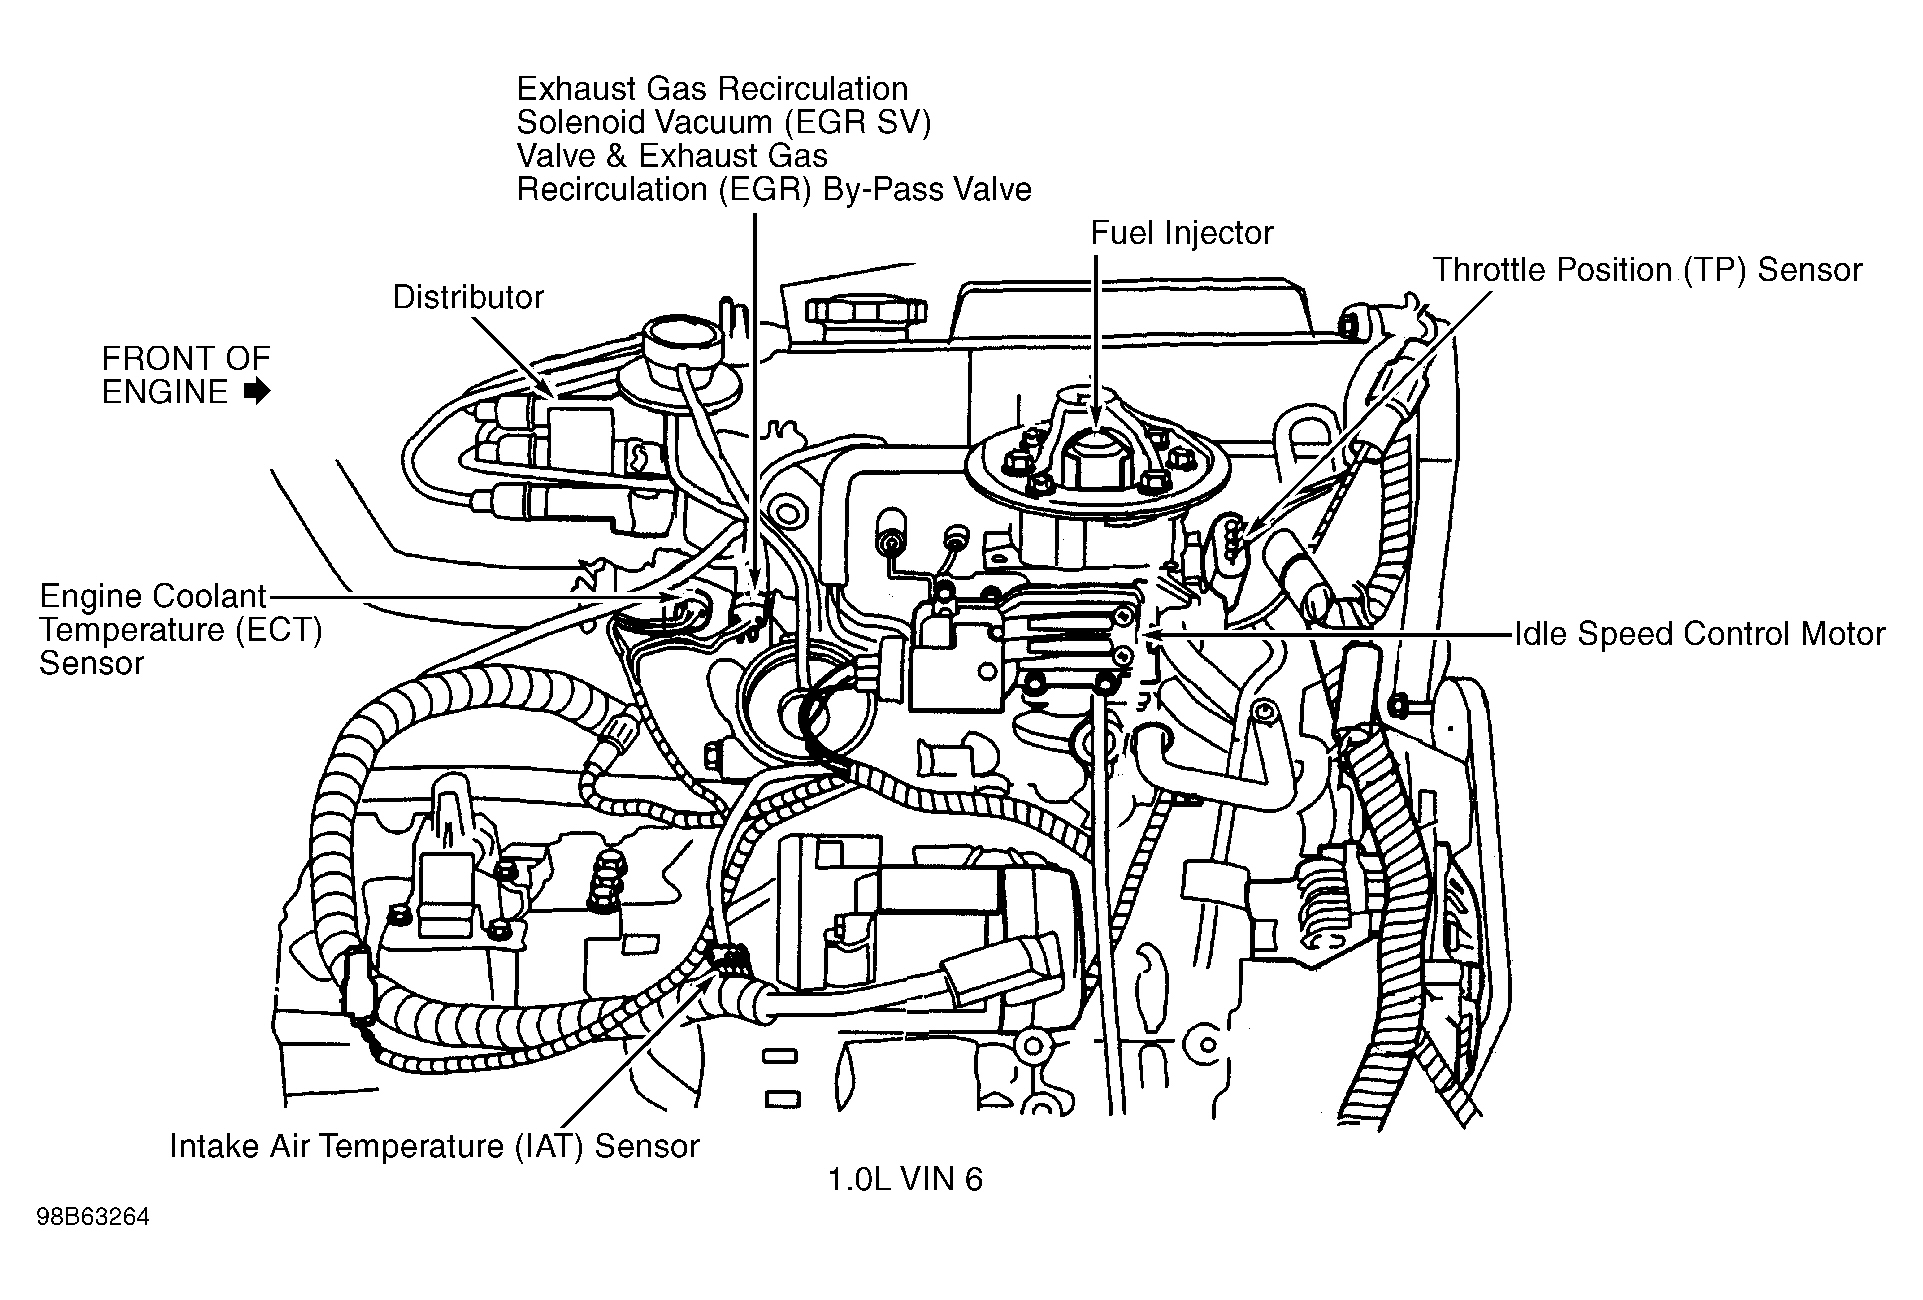 Chevrolet Metro LSi 2000 - Component Locations -  Right Side Of Engine (1.0L VIN 6)